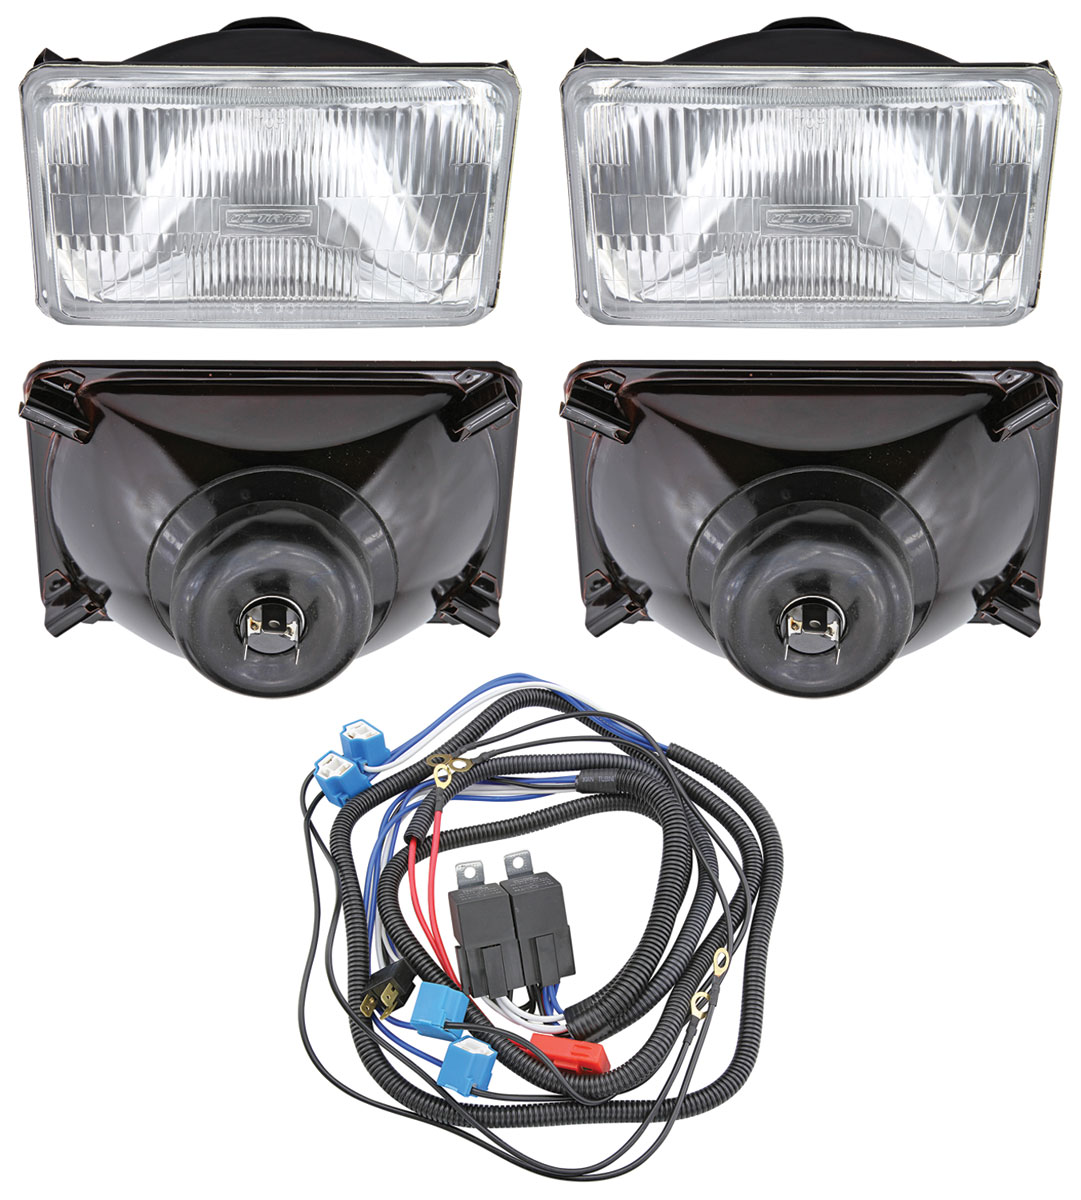 Headlight Upgrade 55 60 H4 X4 And Harness 1975 88 Gms W 4 X6 Sealed Beams